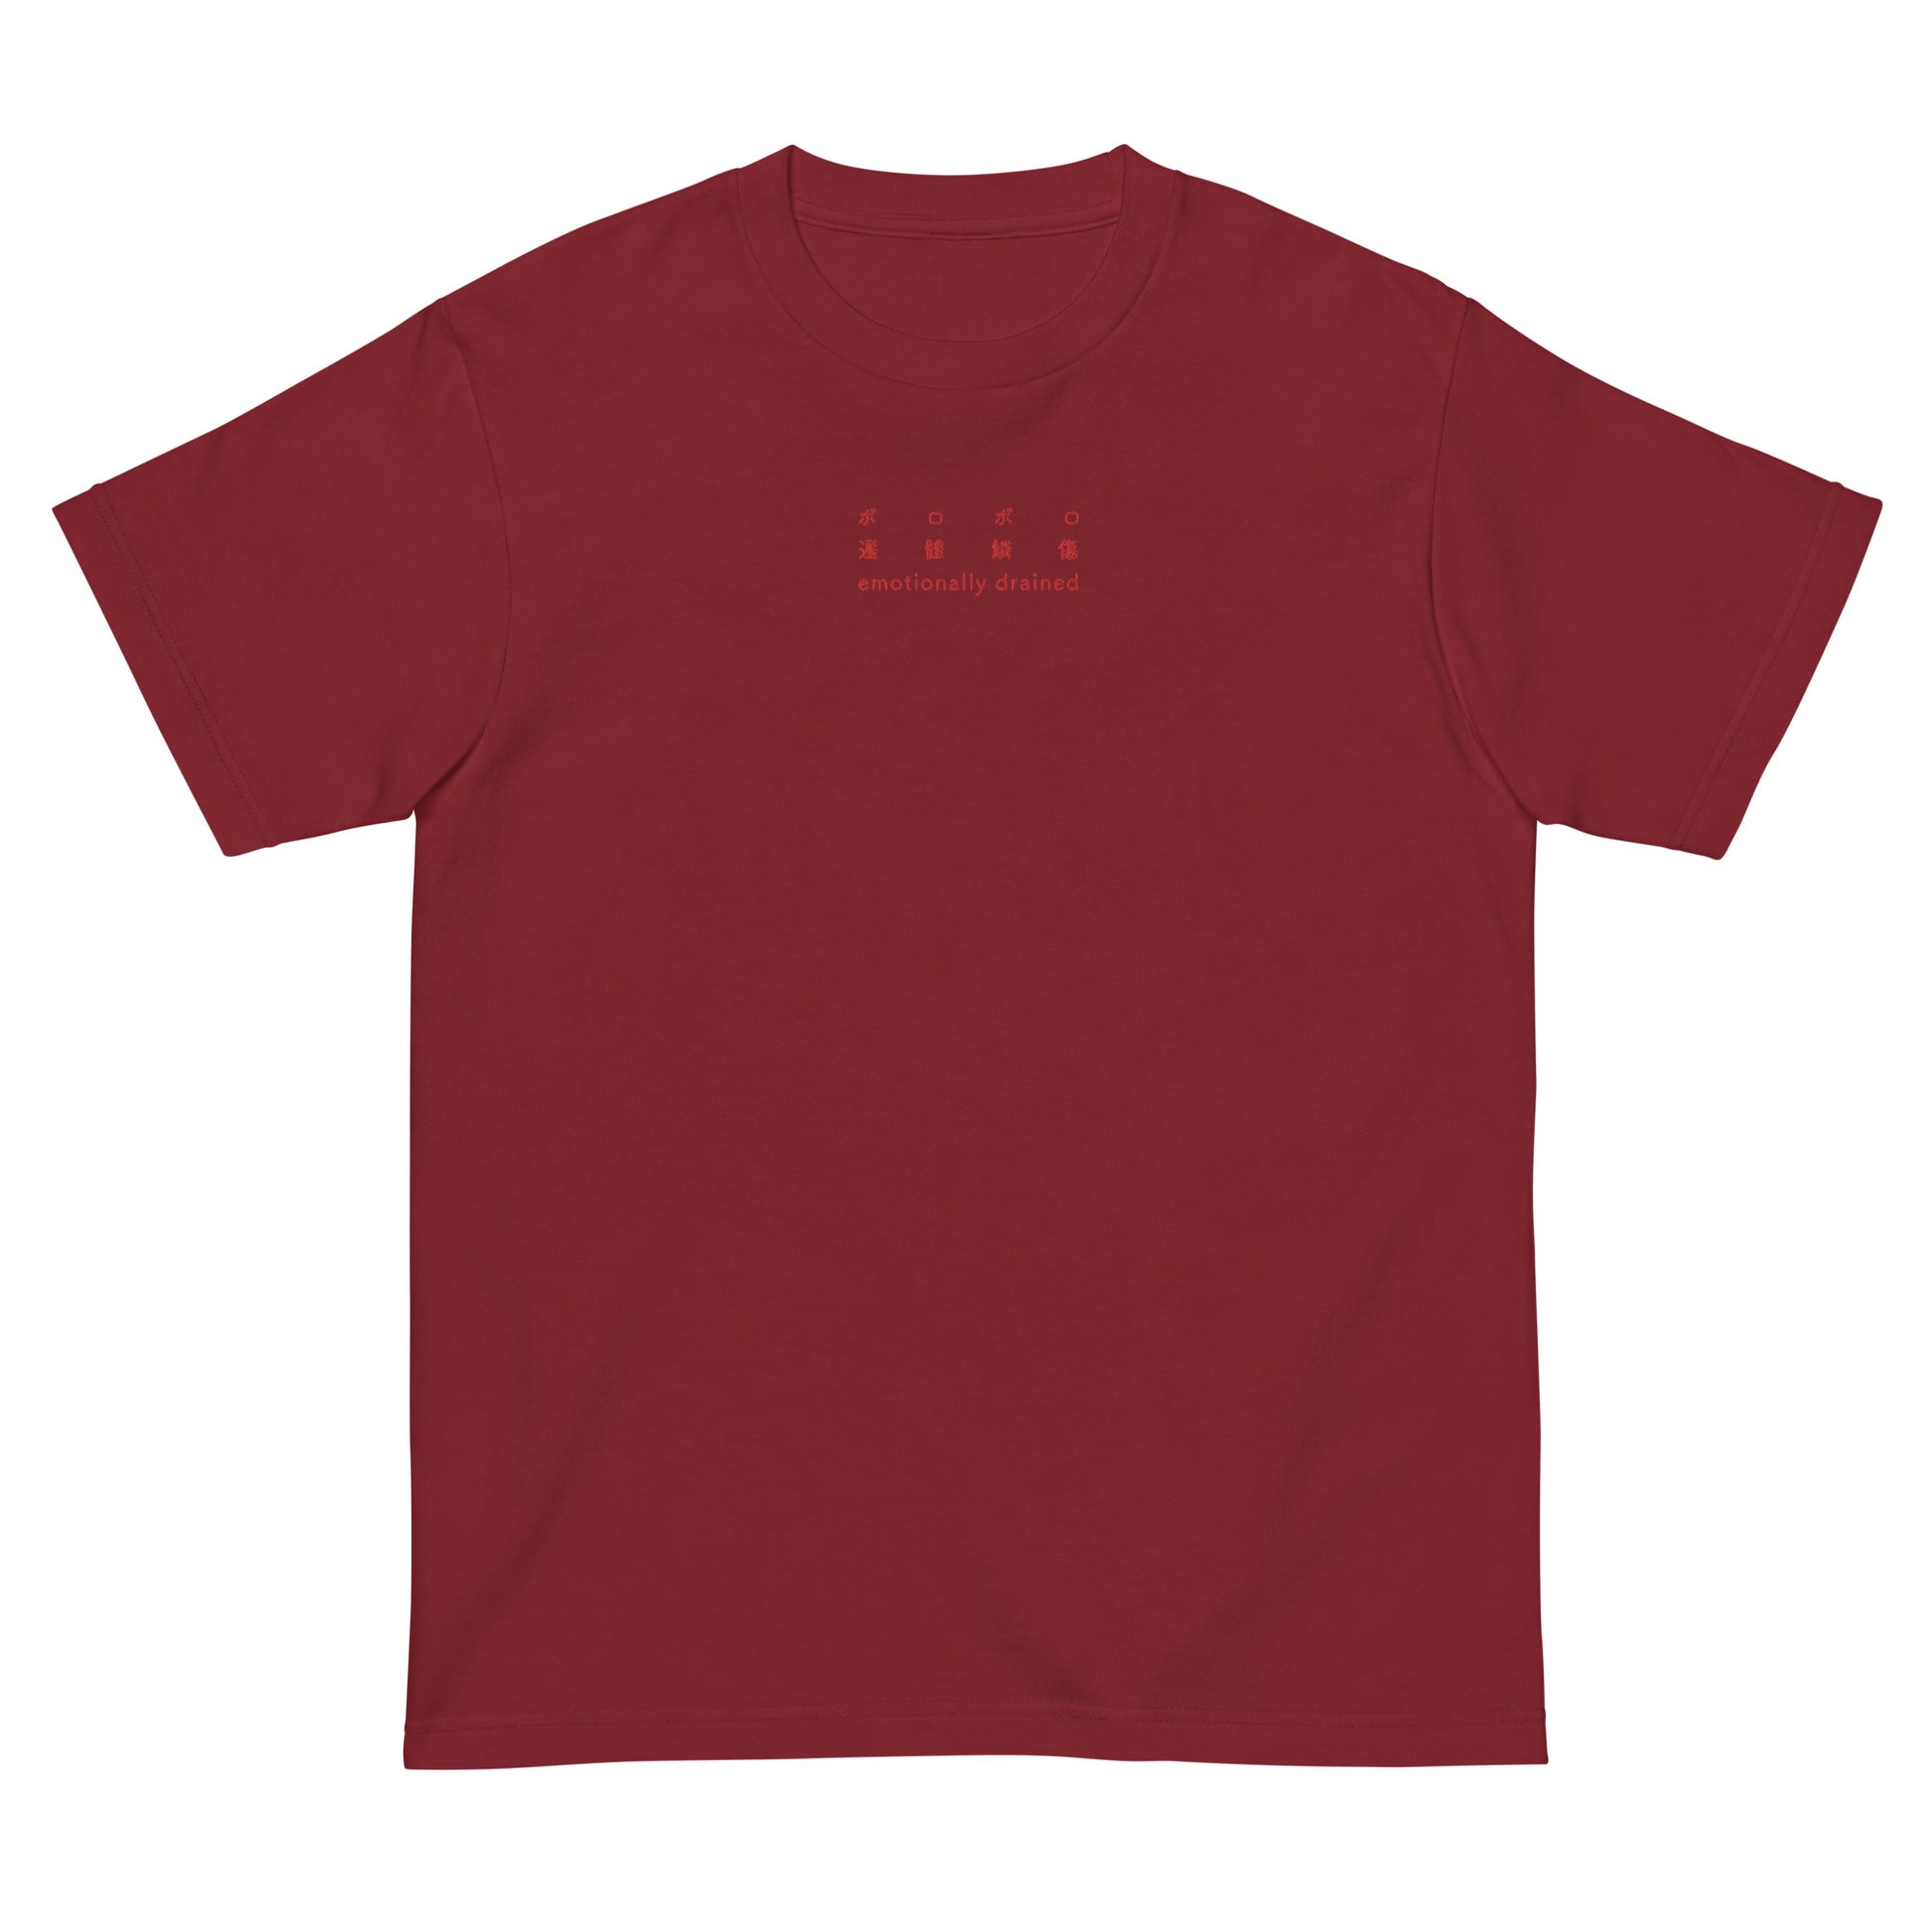 Wine Red High Quality Tee - Front Design with an Red Embroidery "emotionally drained" in three languages